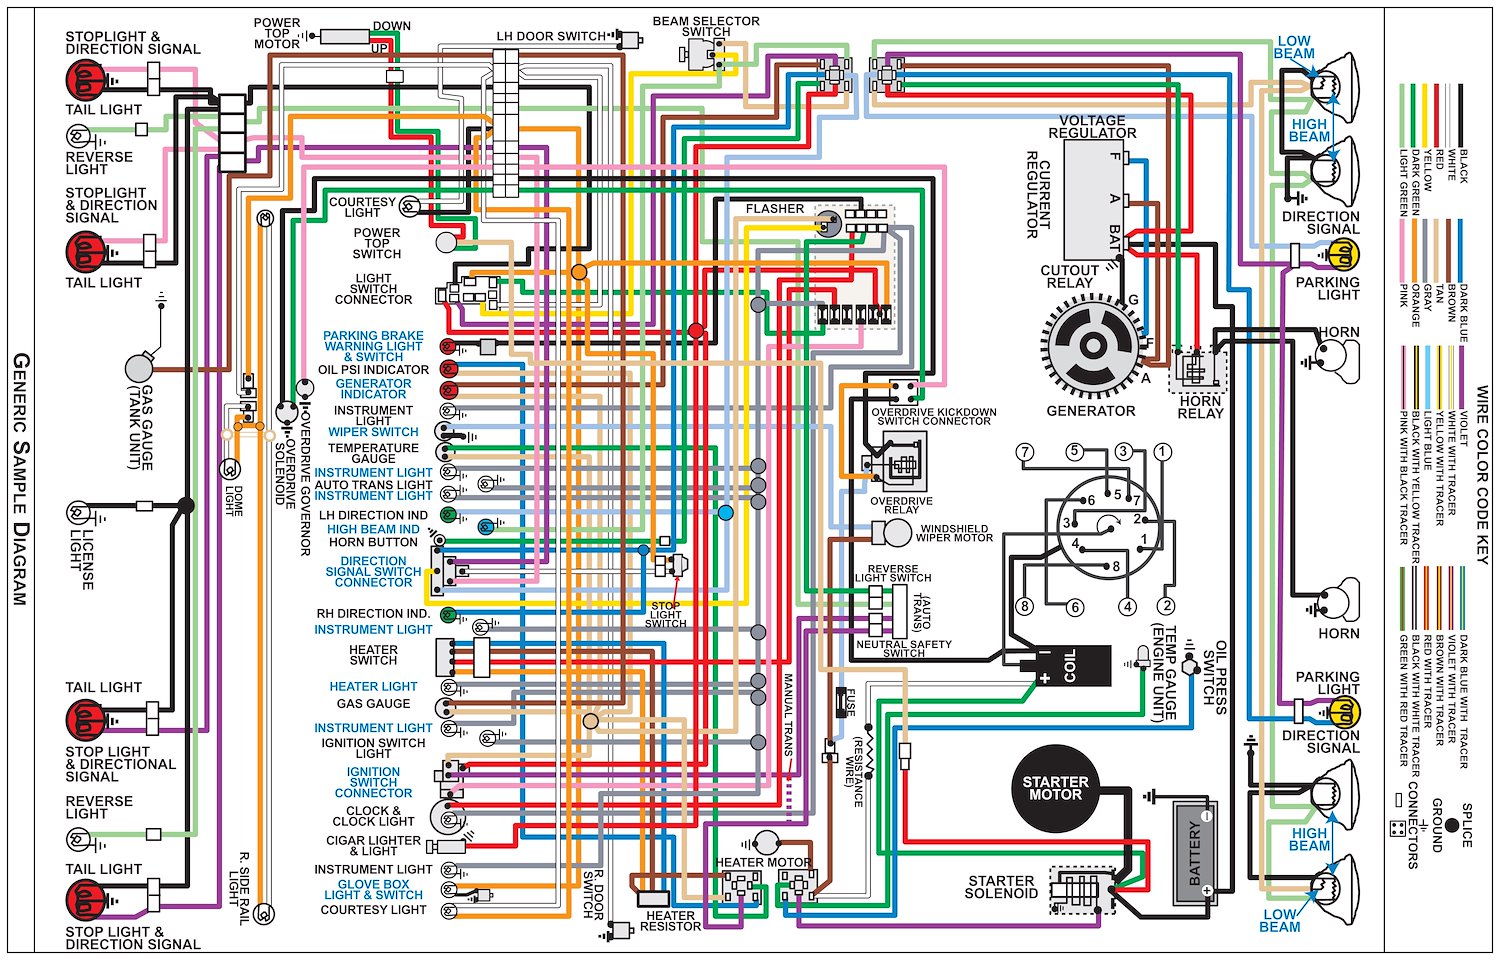 Wiring Diagram for 1975 Dodge Charger, 11 in x 17 in., Laminated